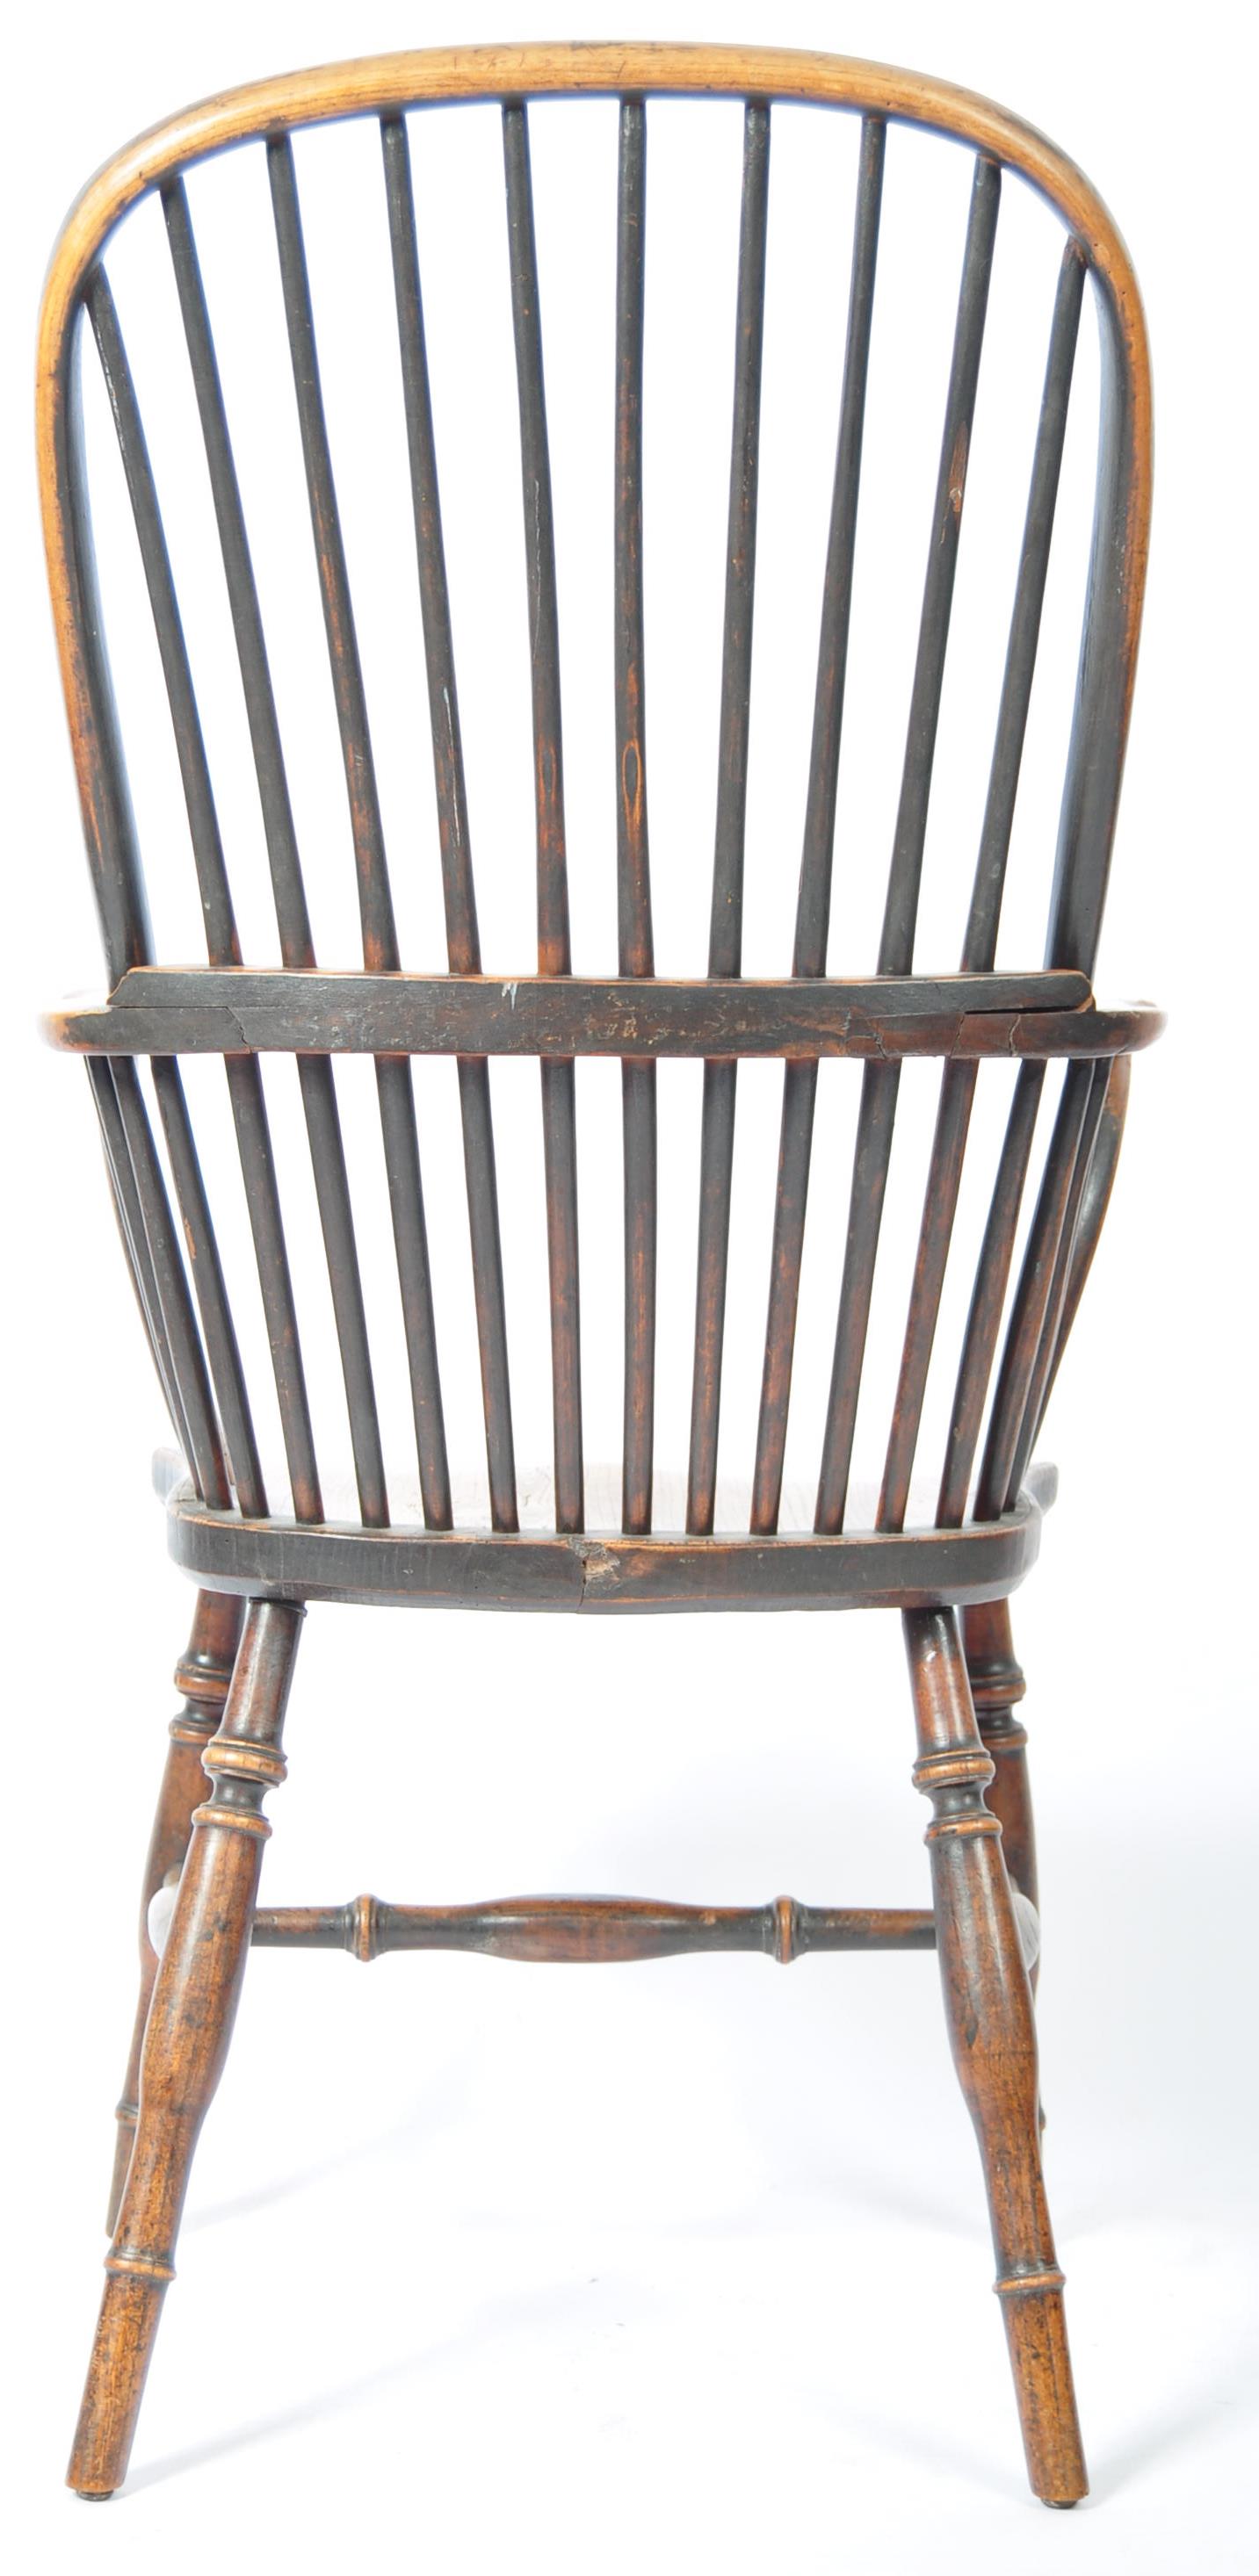 19TH CENTURY ENGLISH ANTIQUE BEECH AND ELM WINDSOR CHAIR - Image 6 of 7